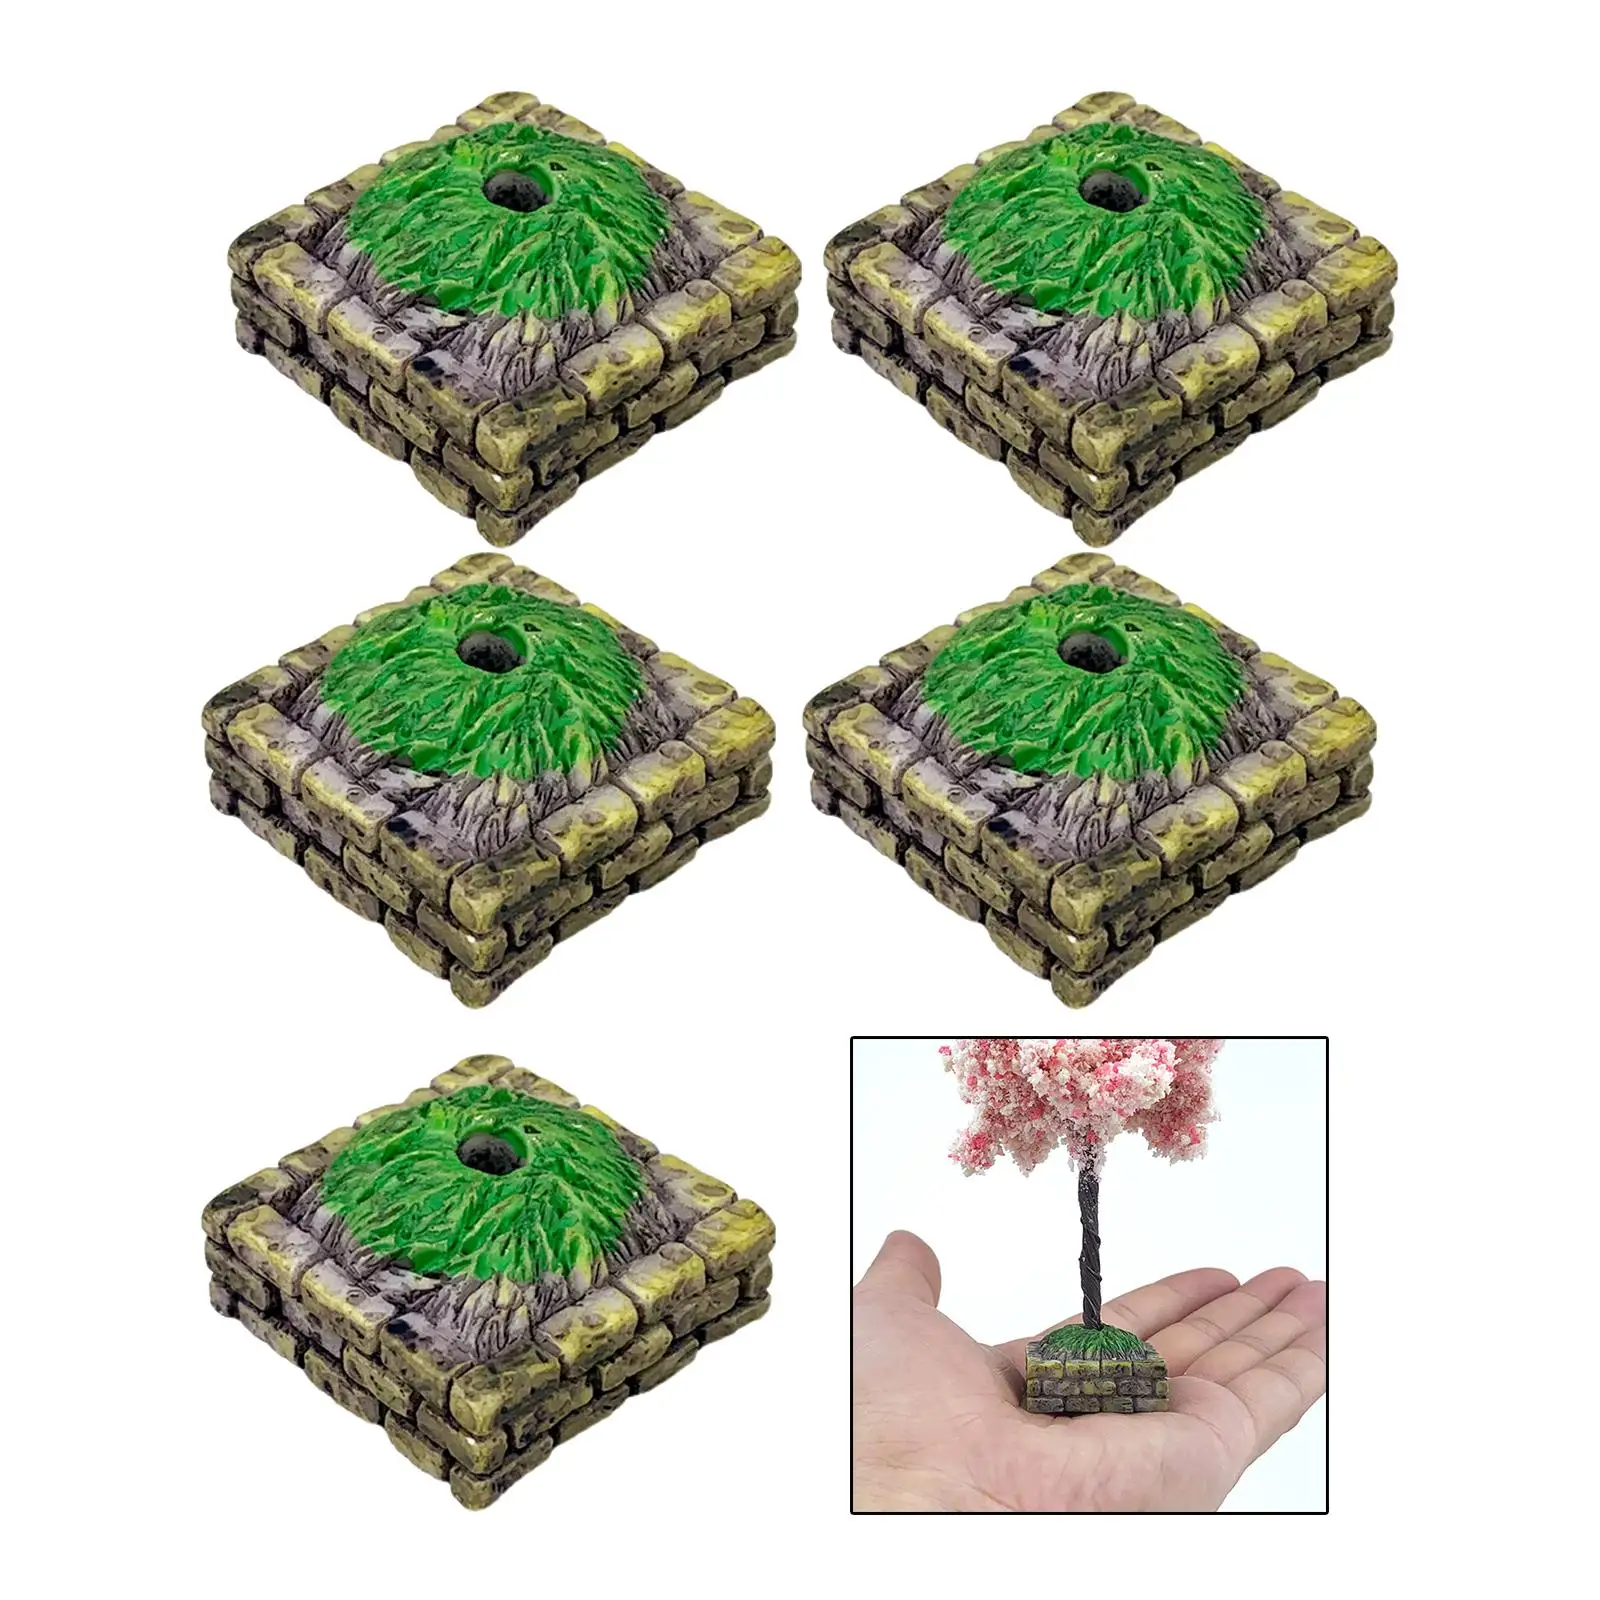 5x Miniature Flower Beds Model Decorative Resin Craft for Architecture Model